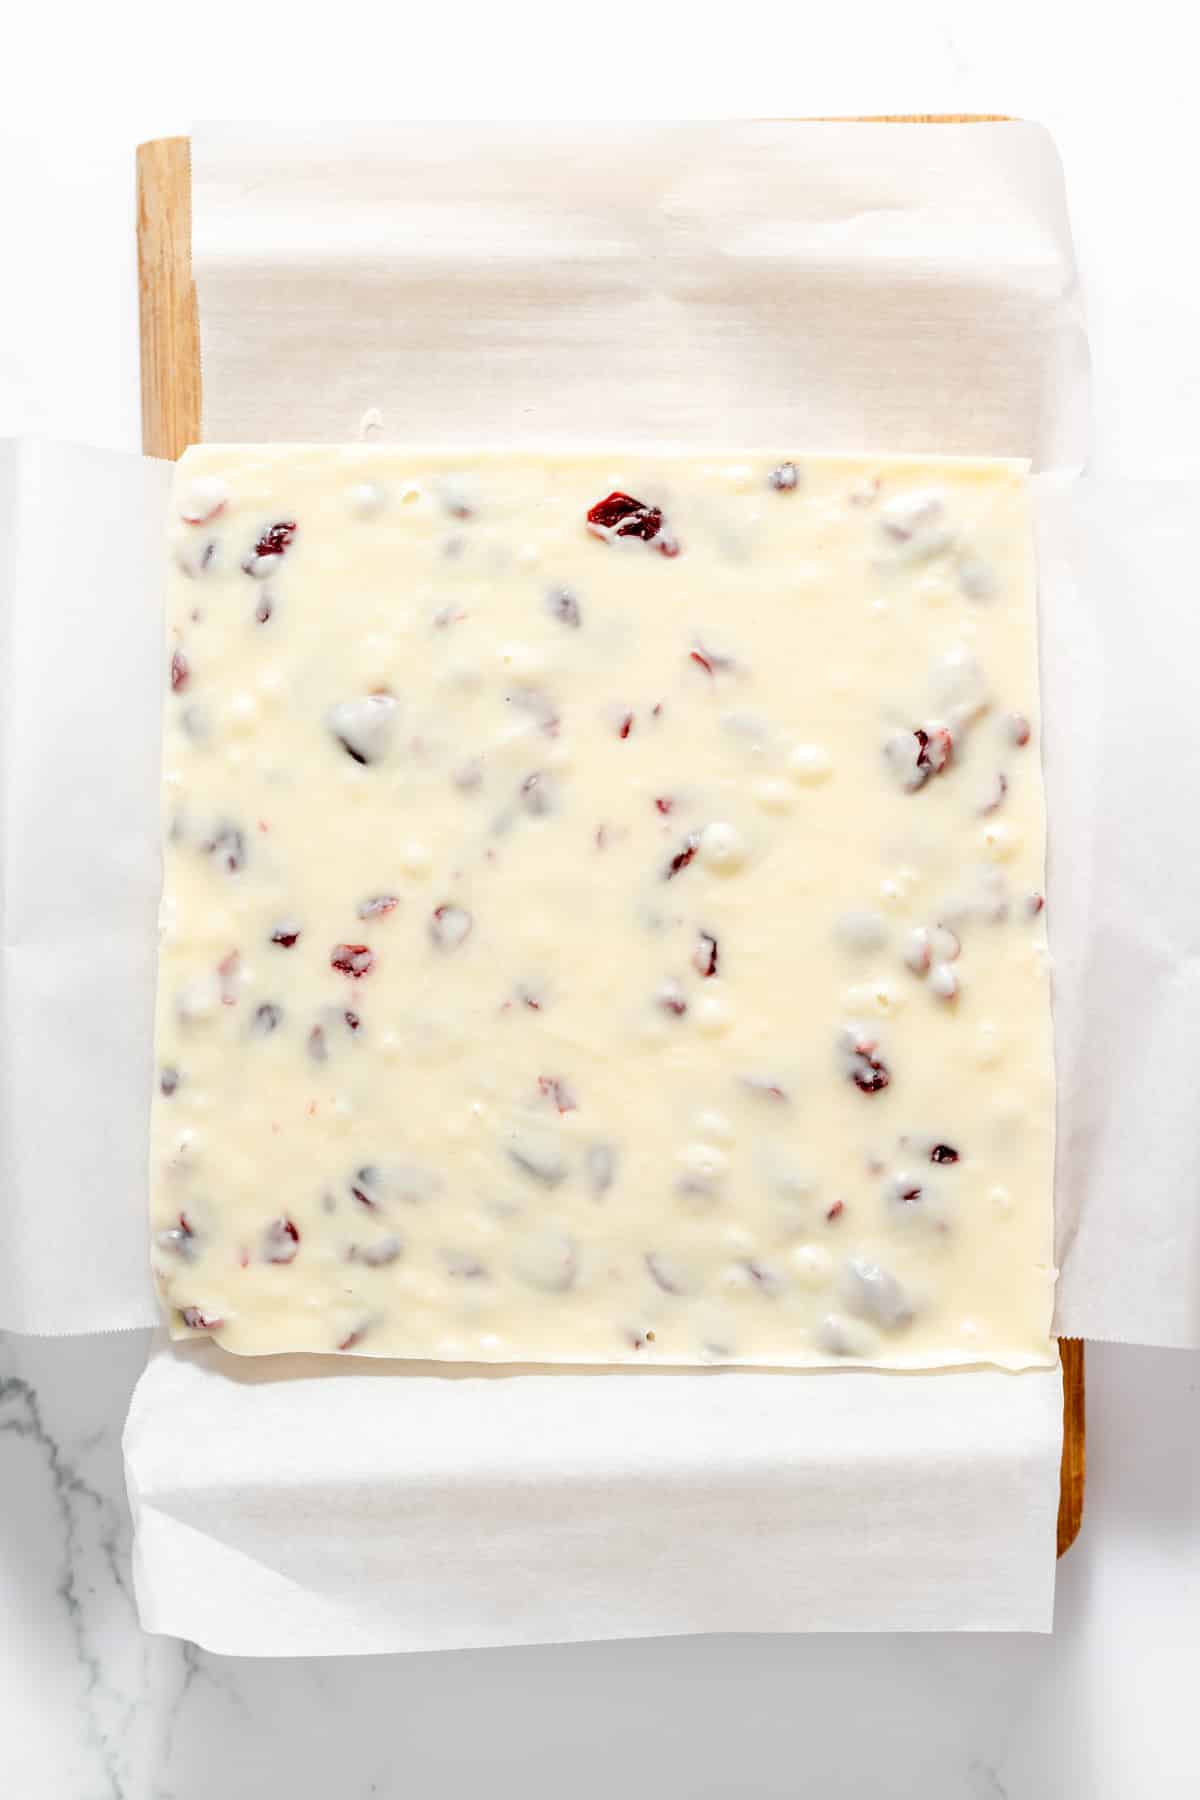 Cranberry white chocolate fudge on a cutting board lined with parchment paper before slicing into squares.